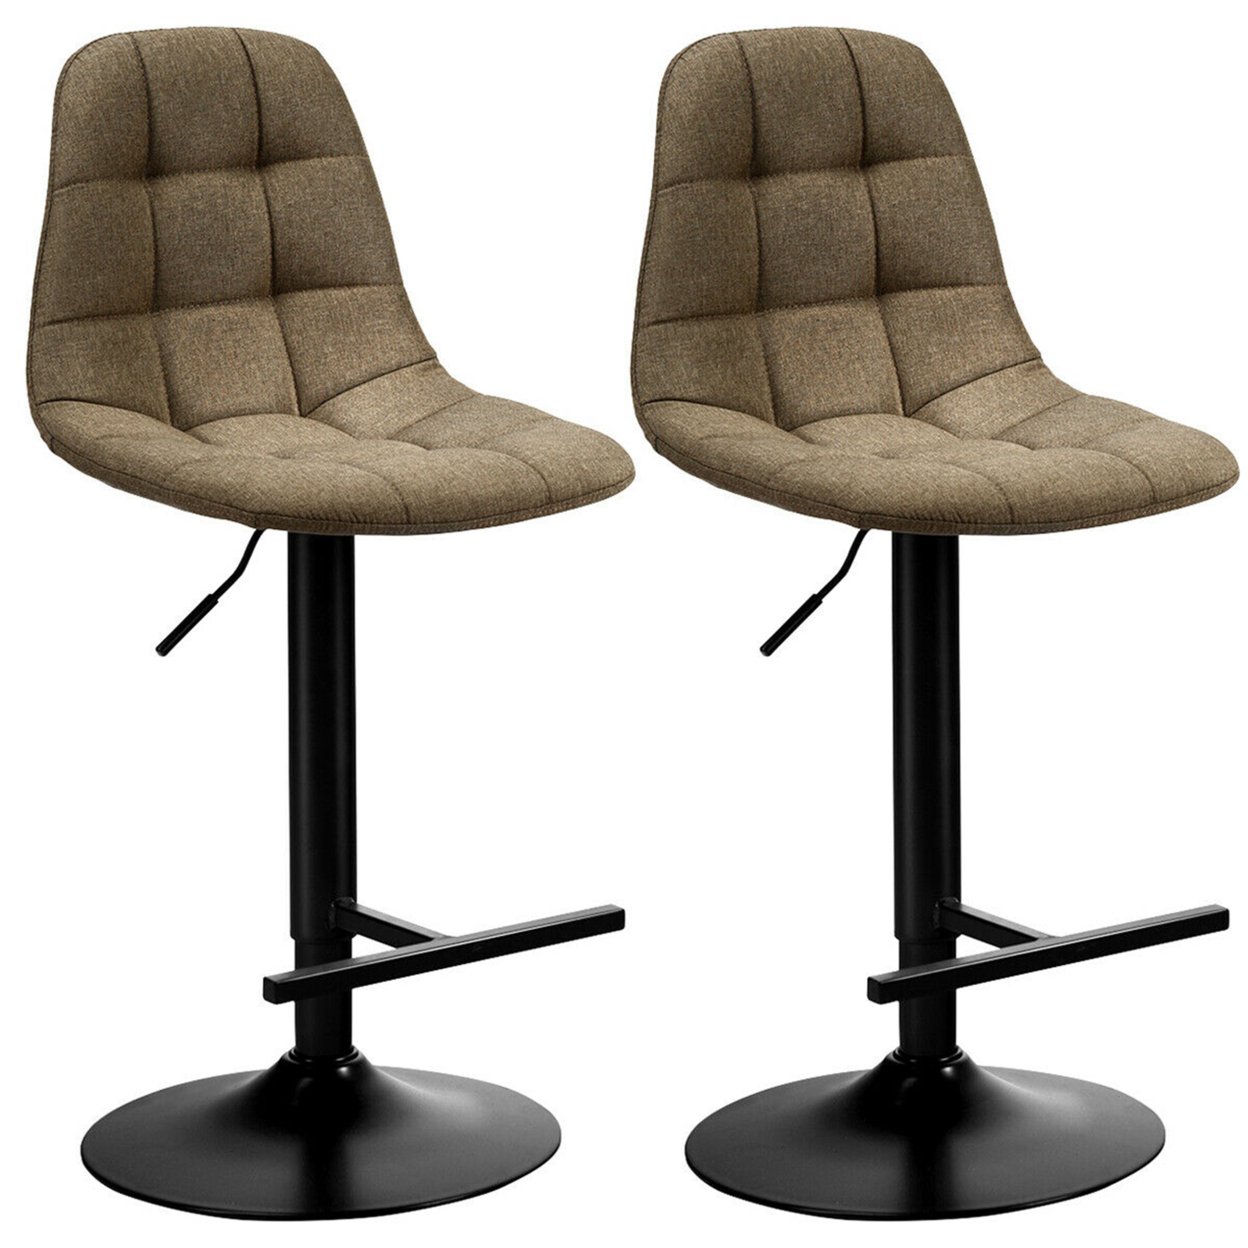 Set Of 2 Adjustable Bar Stools Swivel Counter Height Linen Chairs With Back Brown